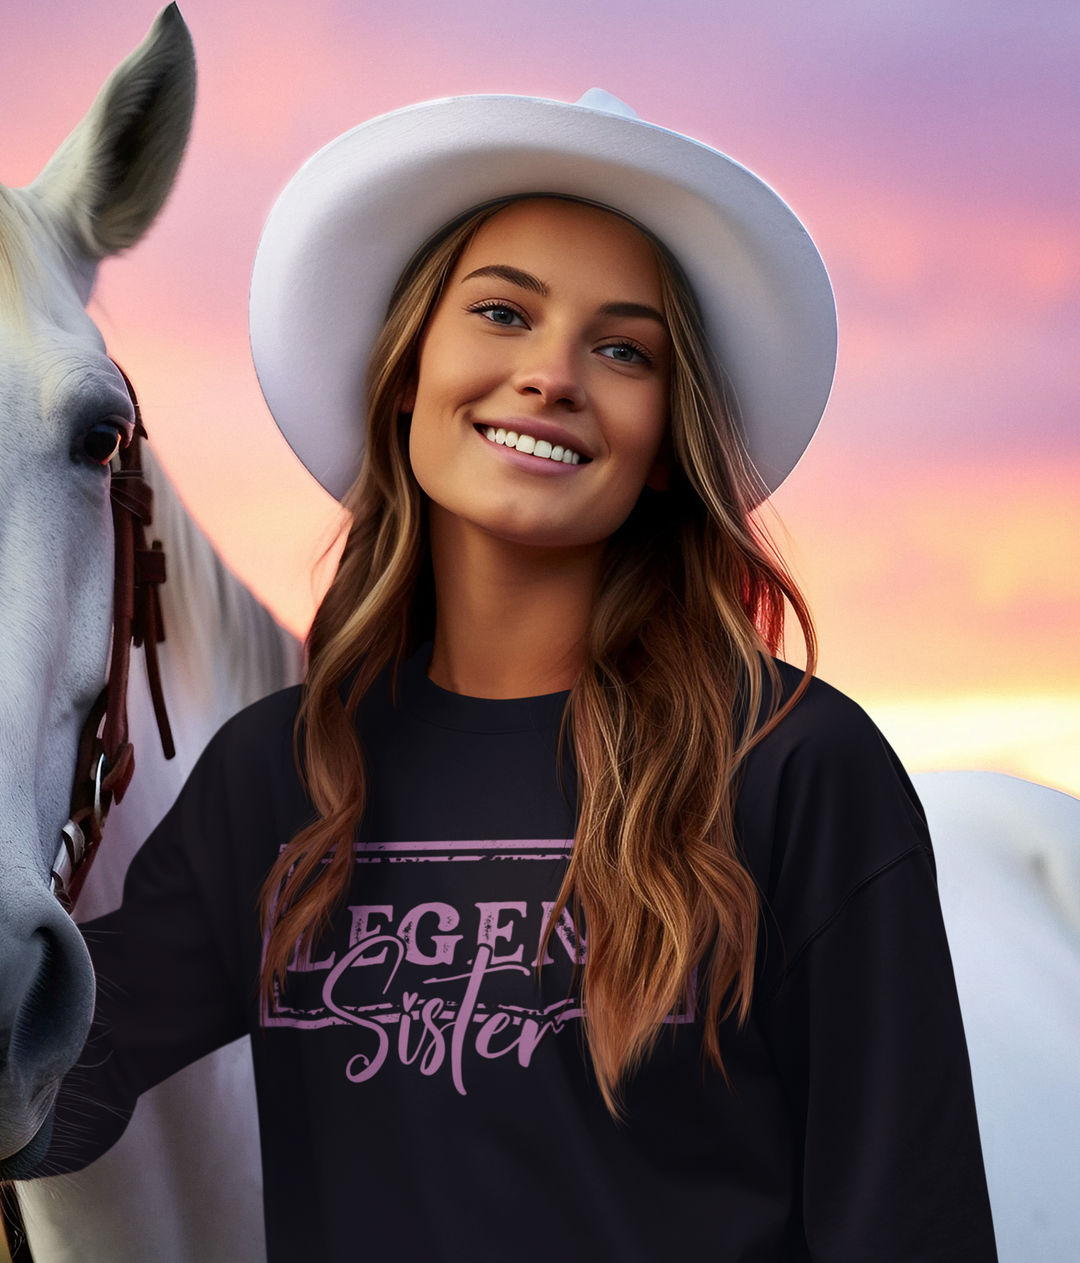 Young Woman in black sweater next to white horse